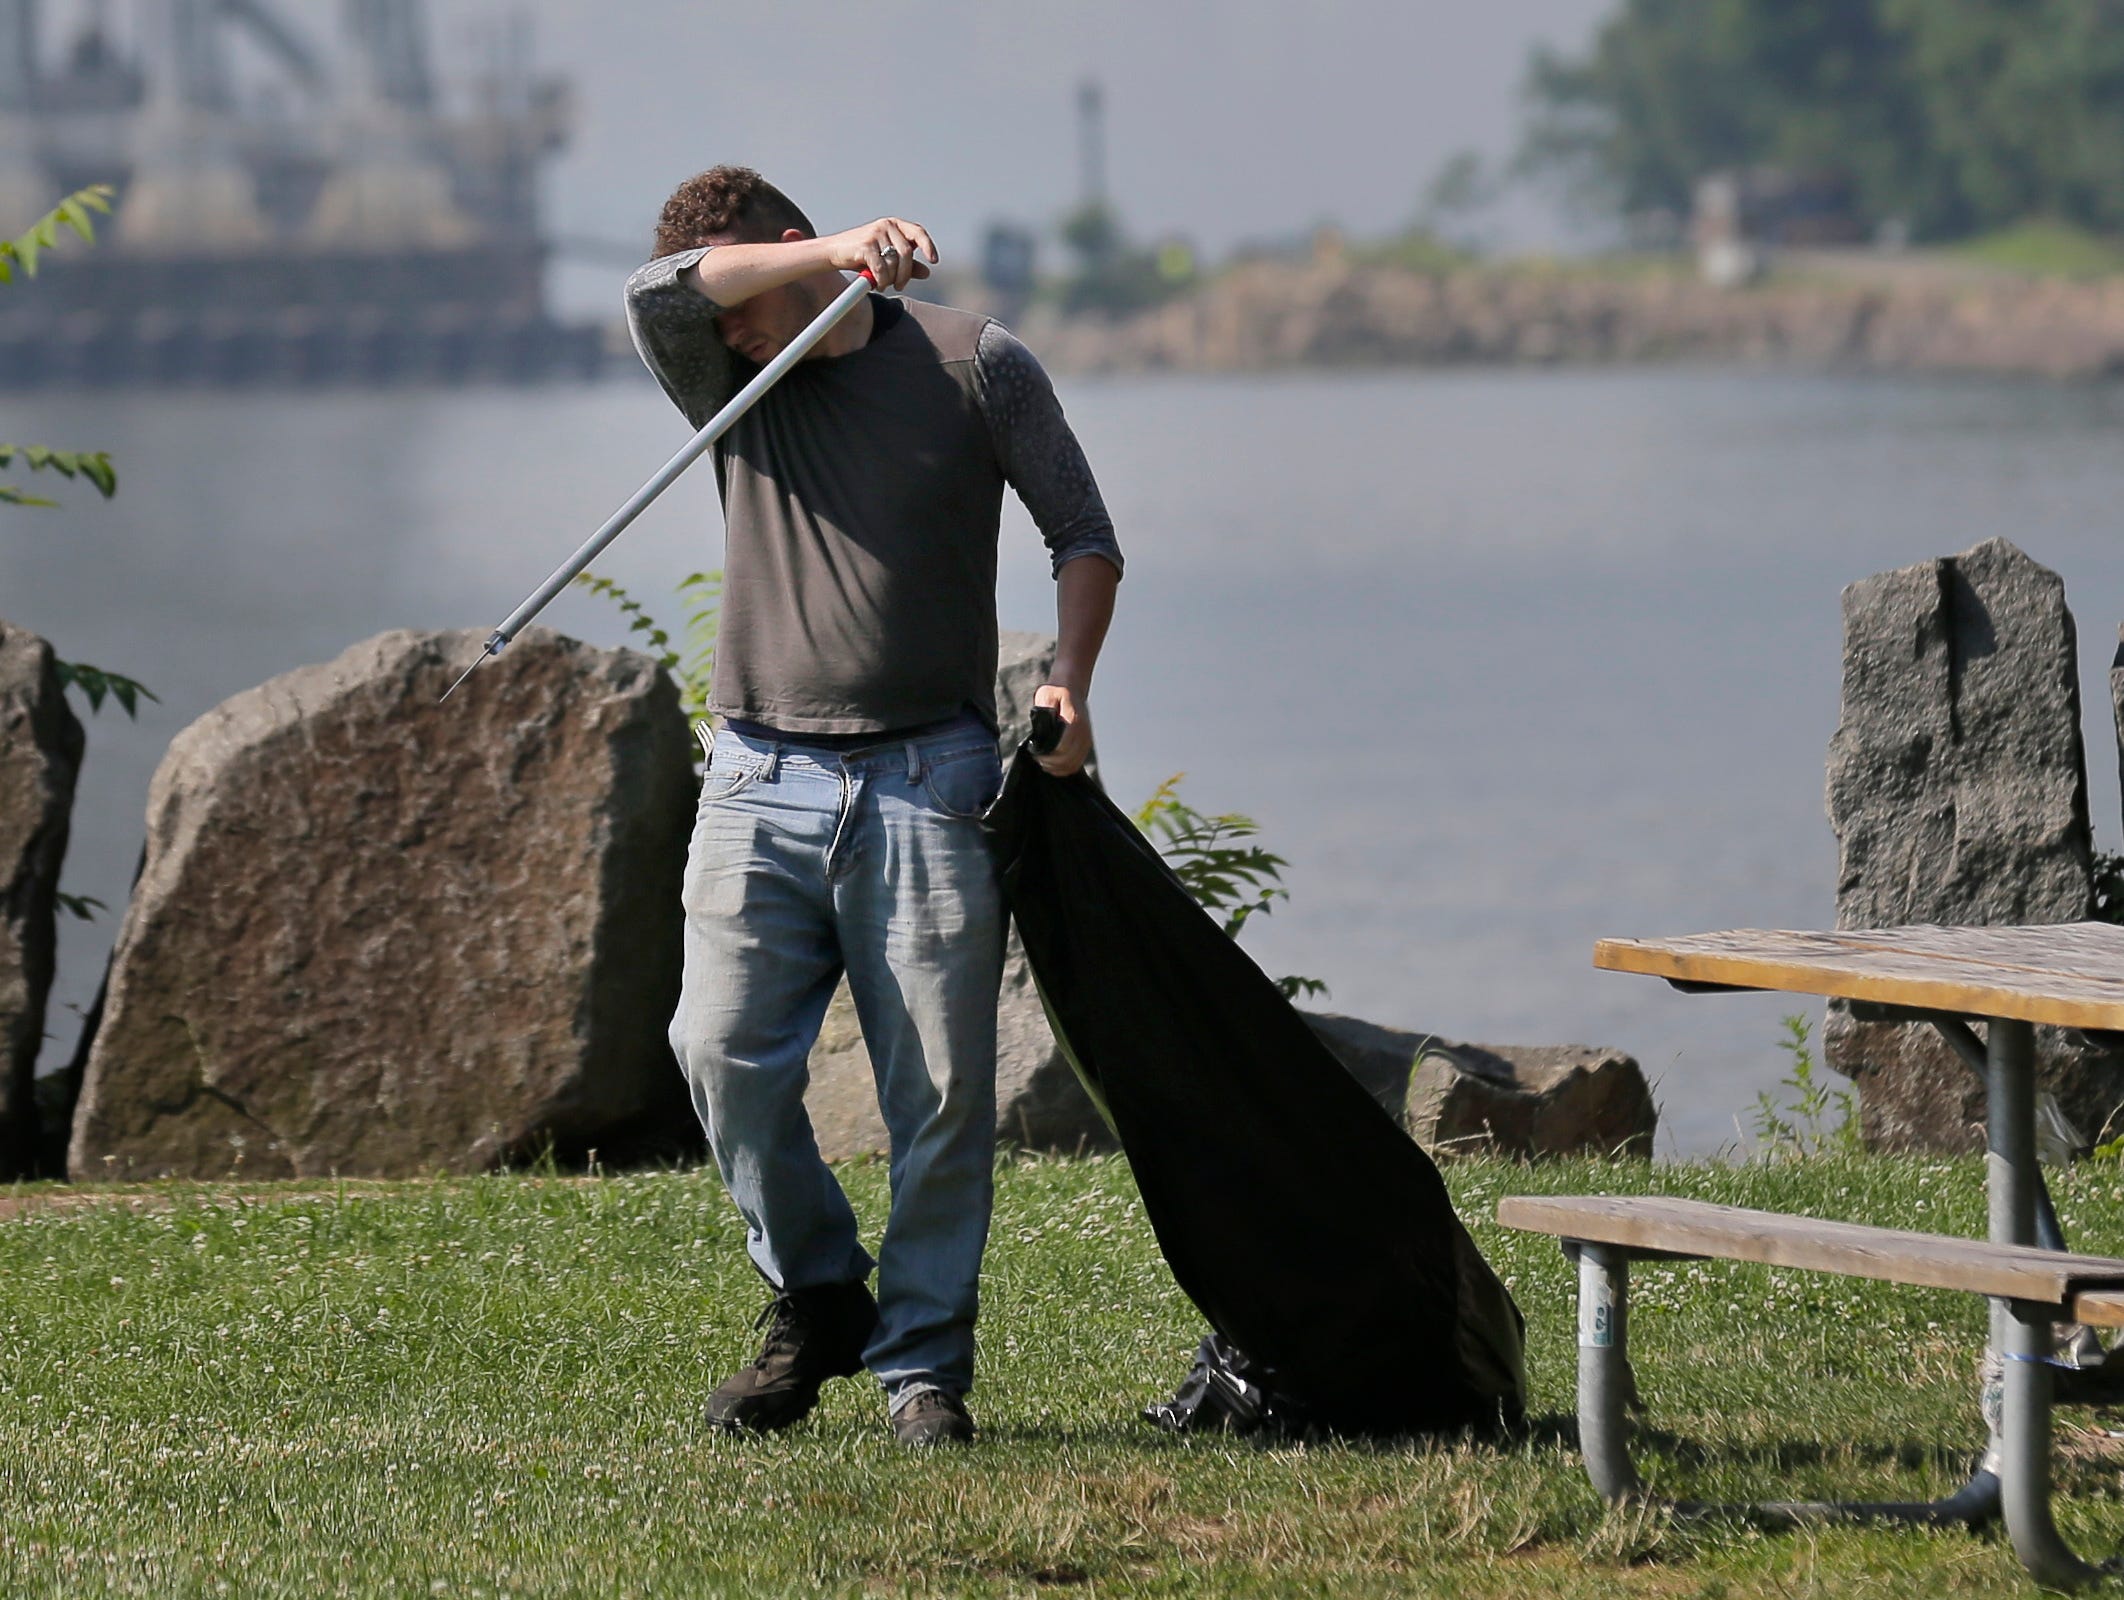 Robert Gidney, left, wipes away sweat while working in Palisades Interstate Park in Ft. Lee, N.J., July 2, 2018. The National Weather Service has most of New Jersey state under an excessive heat warning or heat advisory, with heat indices predicted t